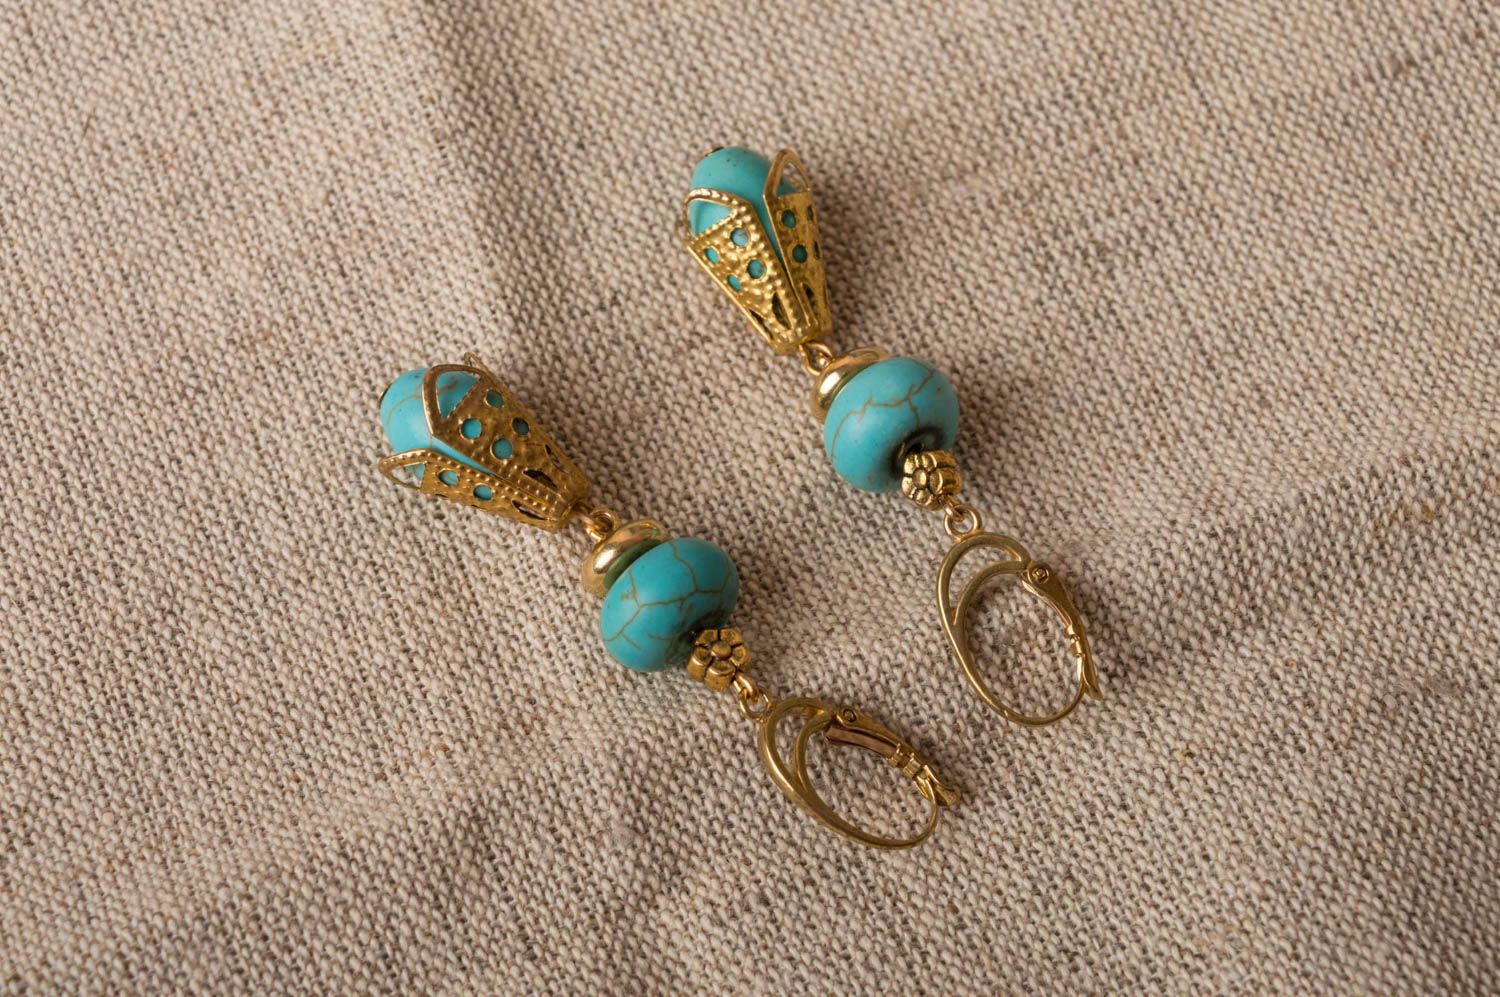 Handmade accessory made of natural stones earrings made of turquoise and brass photo 1